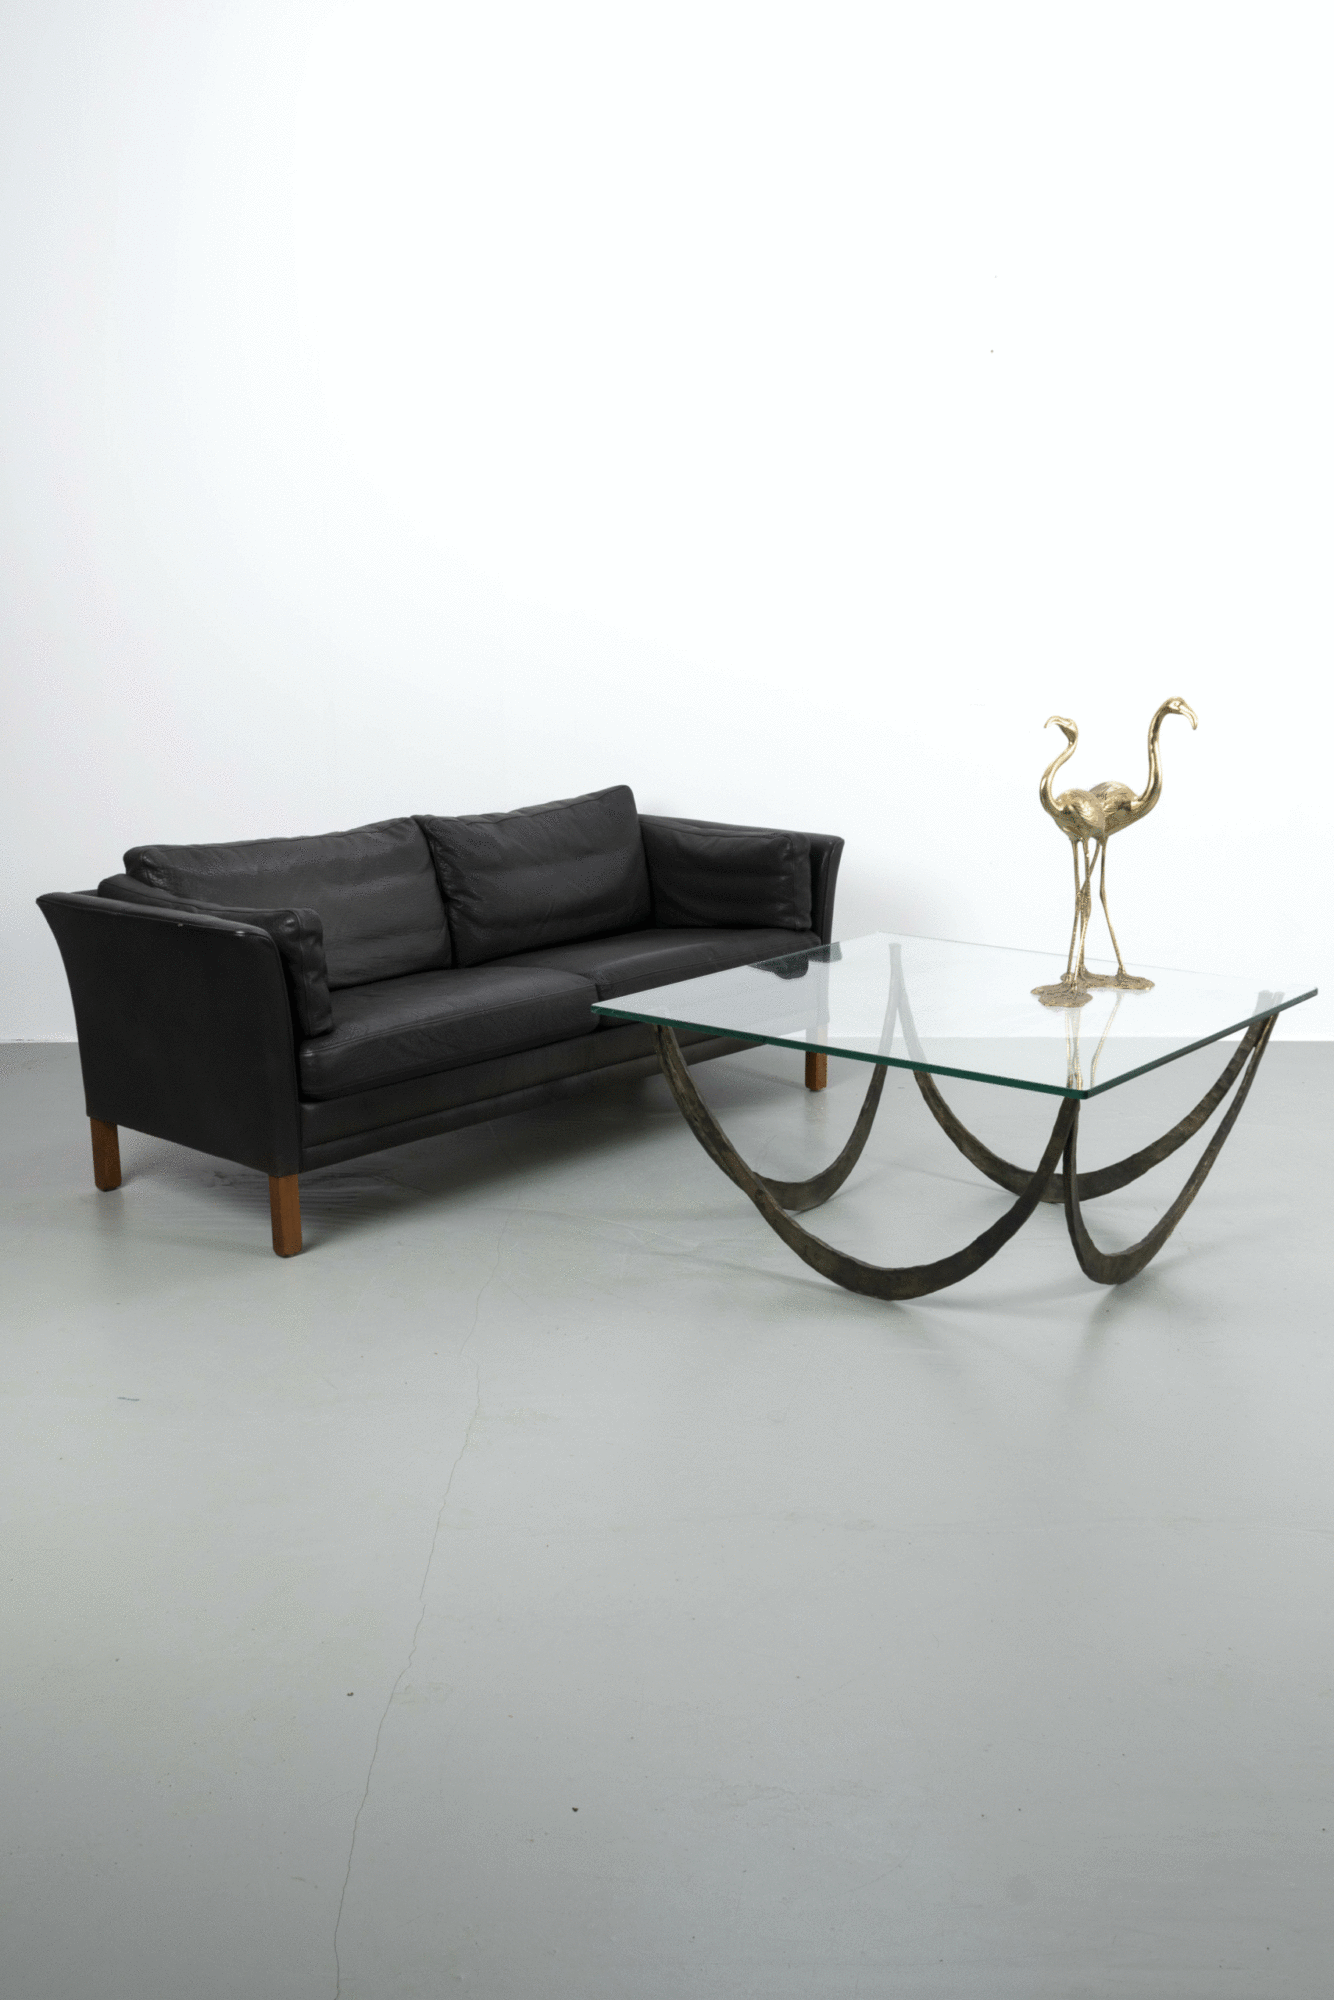 Bronze coffee table with glass top